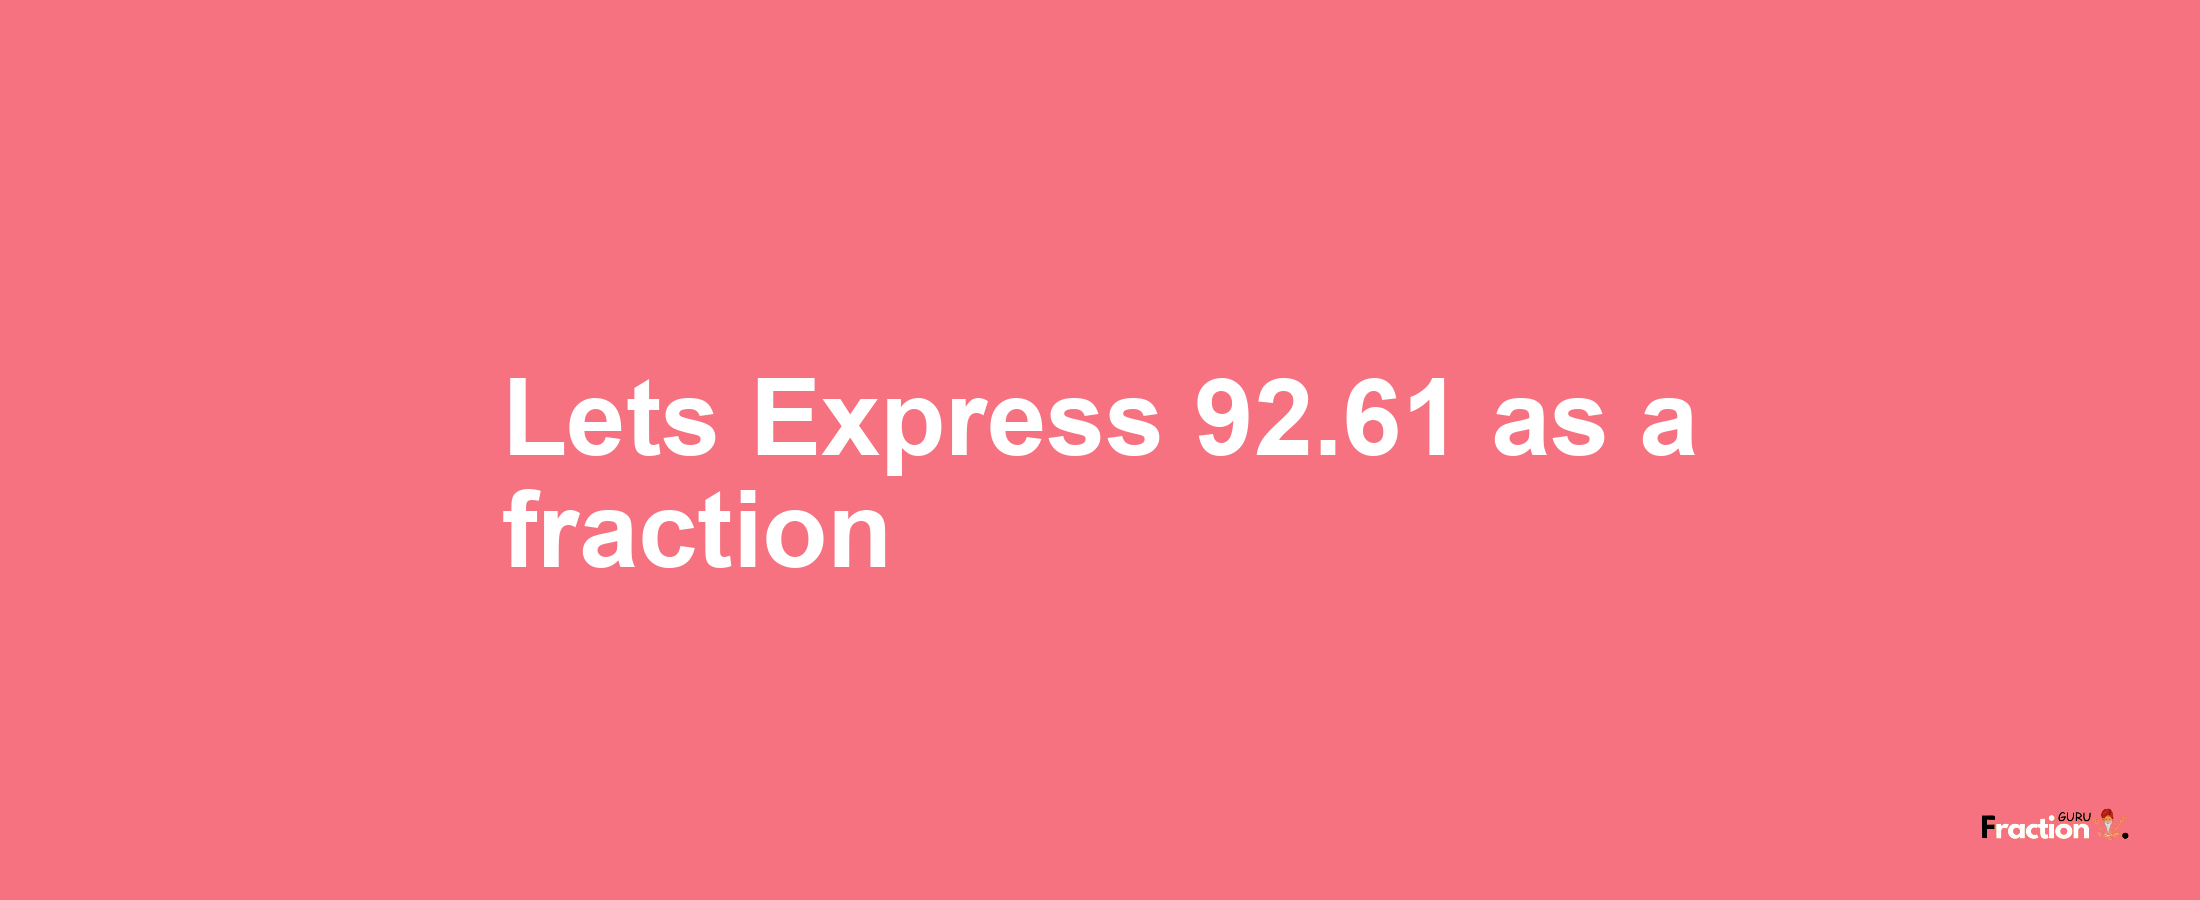 Lets Express 92.61 as afraction